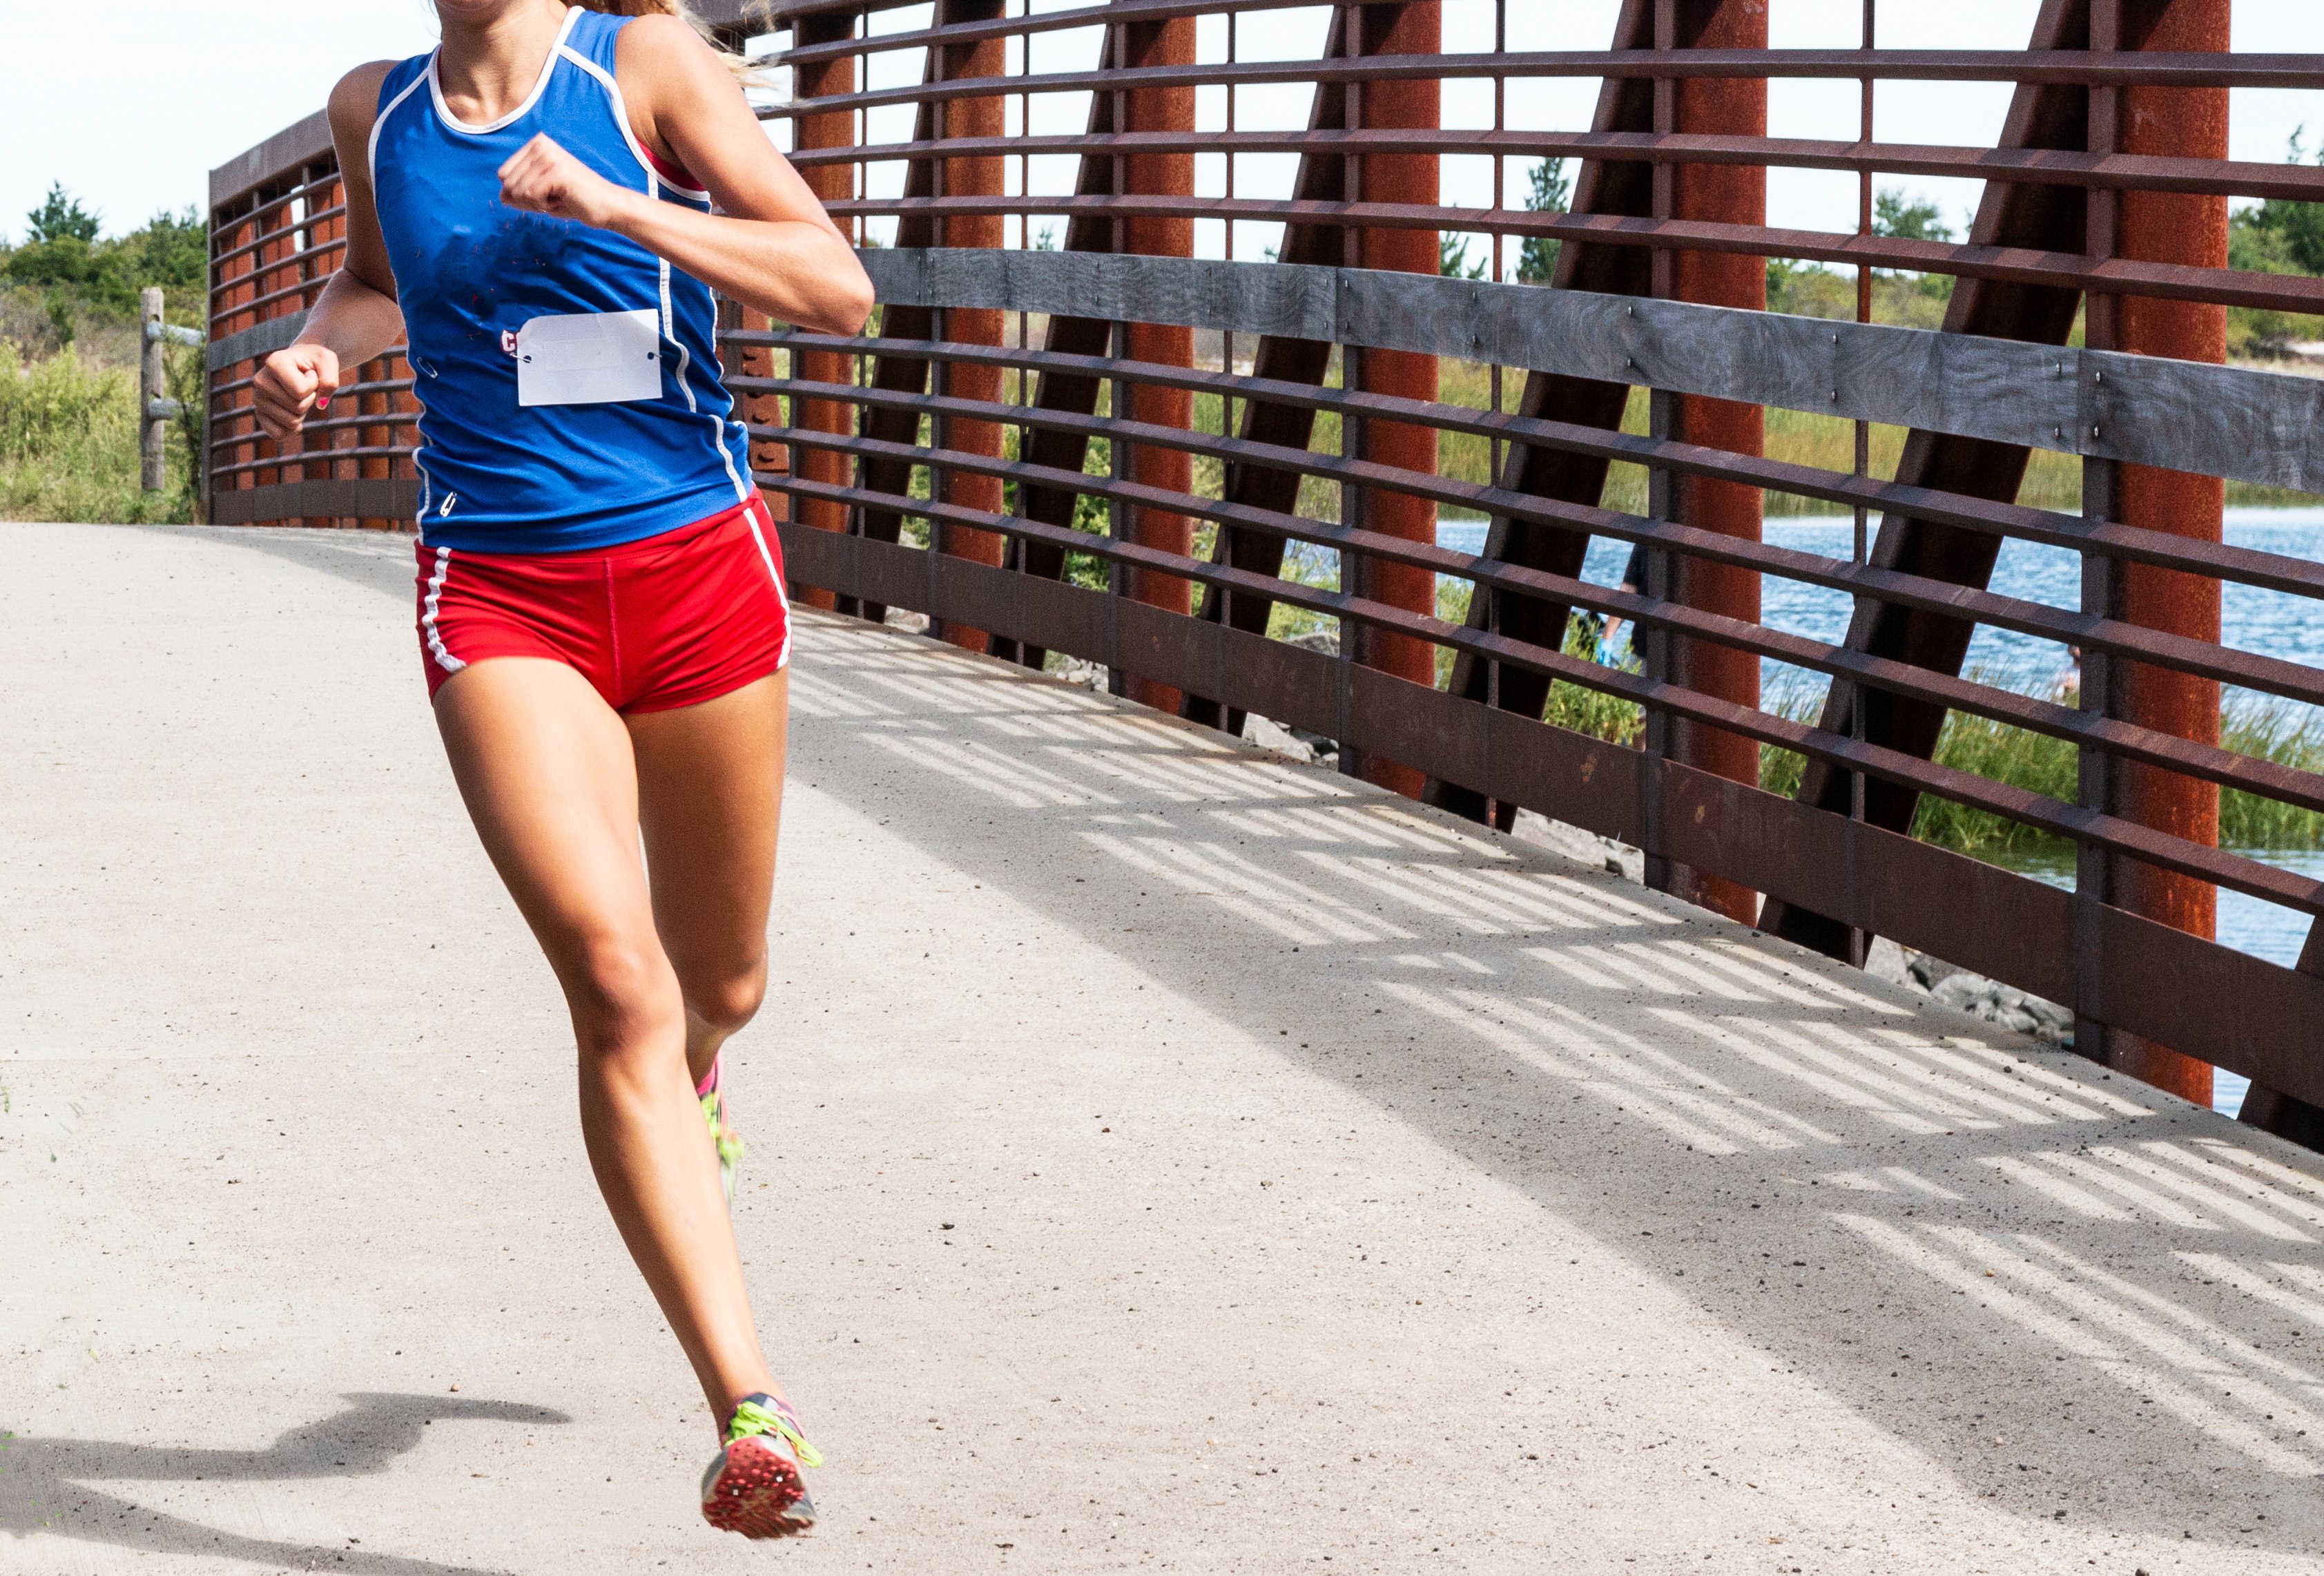 A high school cross country girl is running a race crossing a bridge wearing red shorts and blue racing top | Photo: Shutterstock